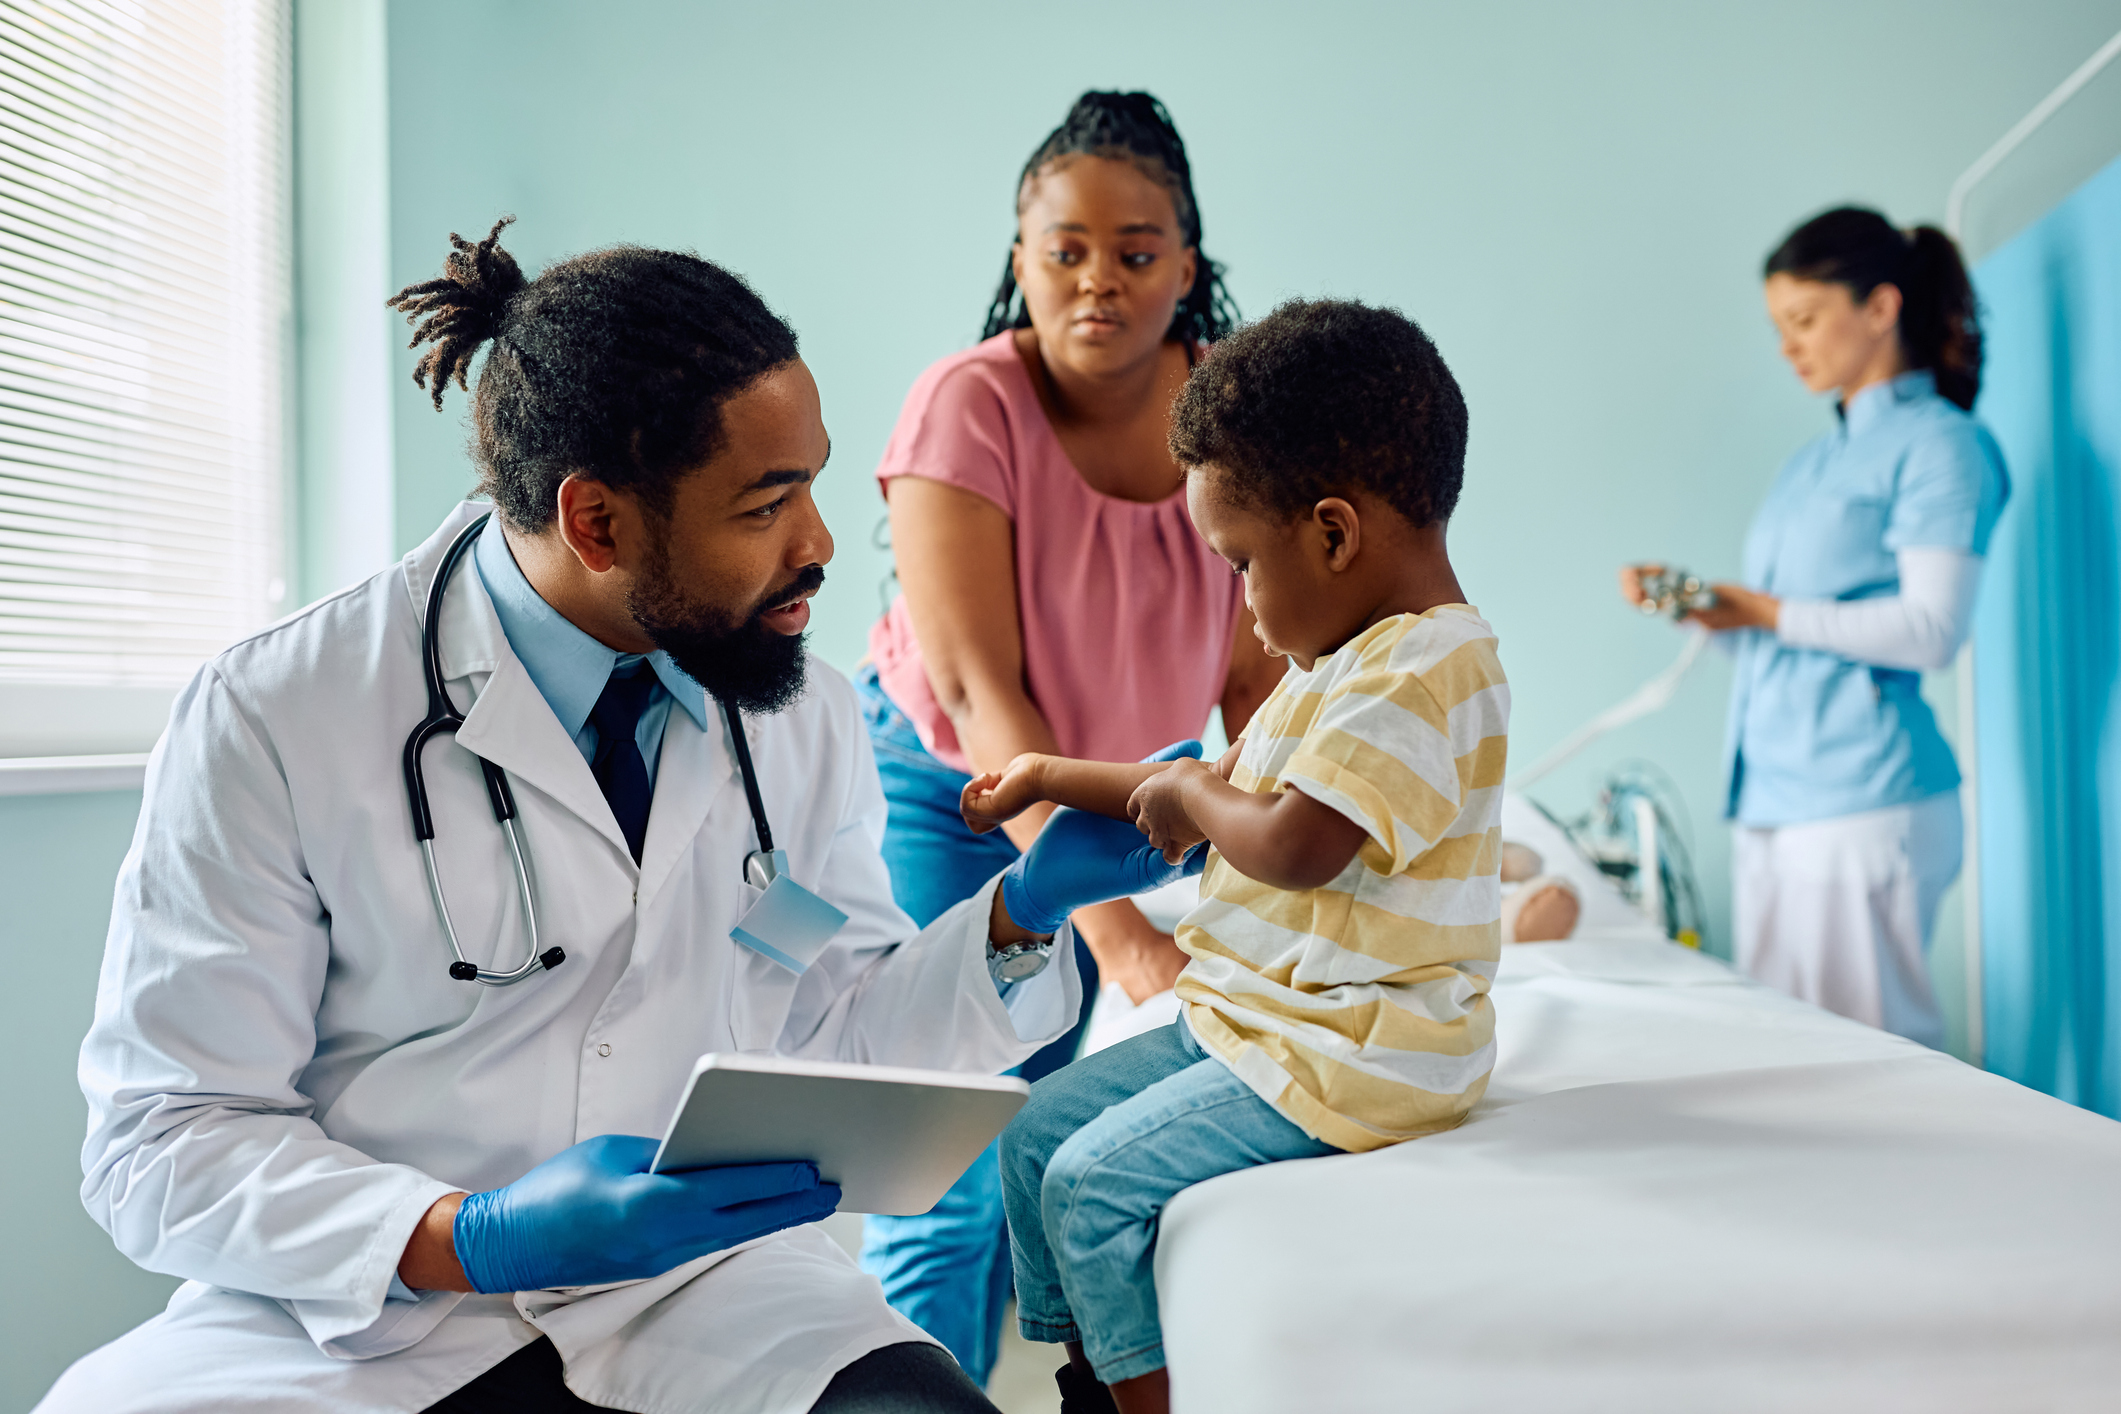 A young, male African American doctor with a beard and a short ponytail checks a young Black boy's joints for mobility issues during a regular sickle cell disease checkup while the boy's mother, a young Black woman with her hair in a braided ponytail, watches from a distance and a female nurse in blue scrubs takes notes.